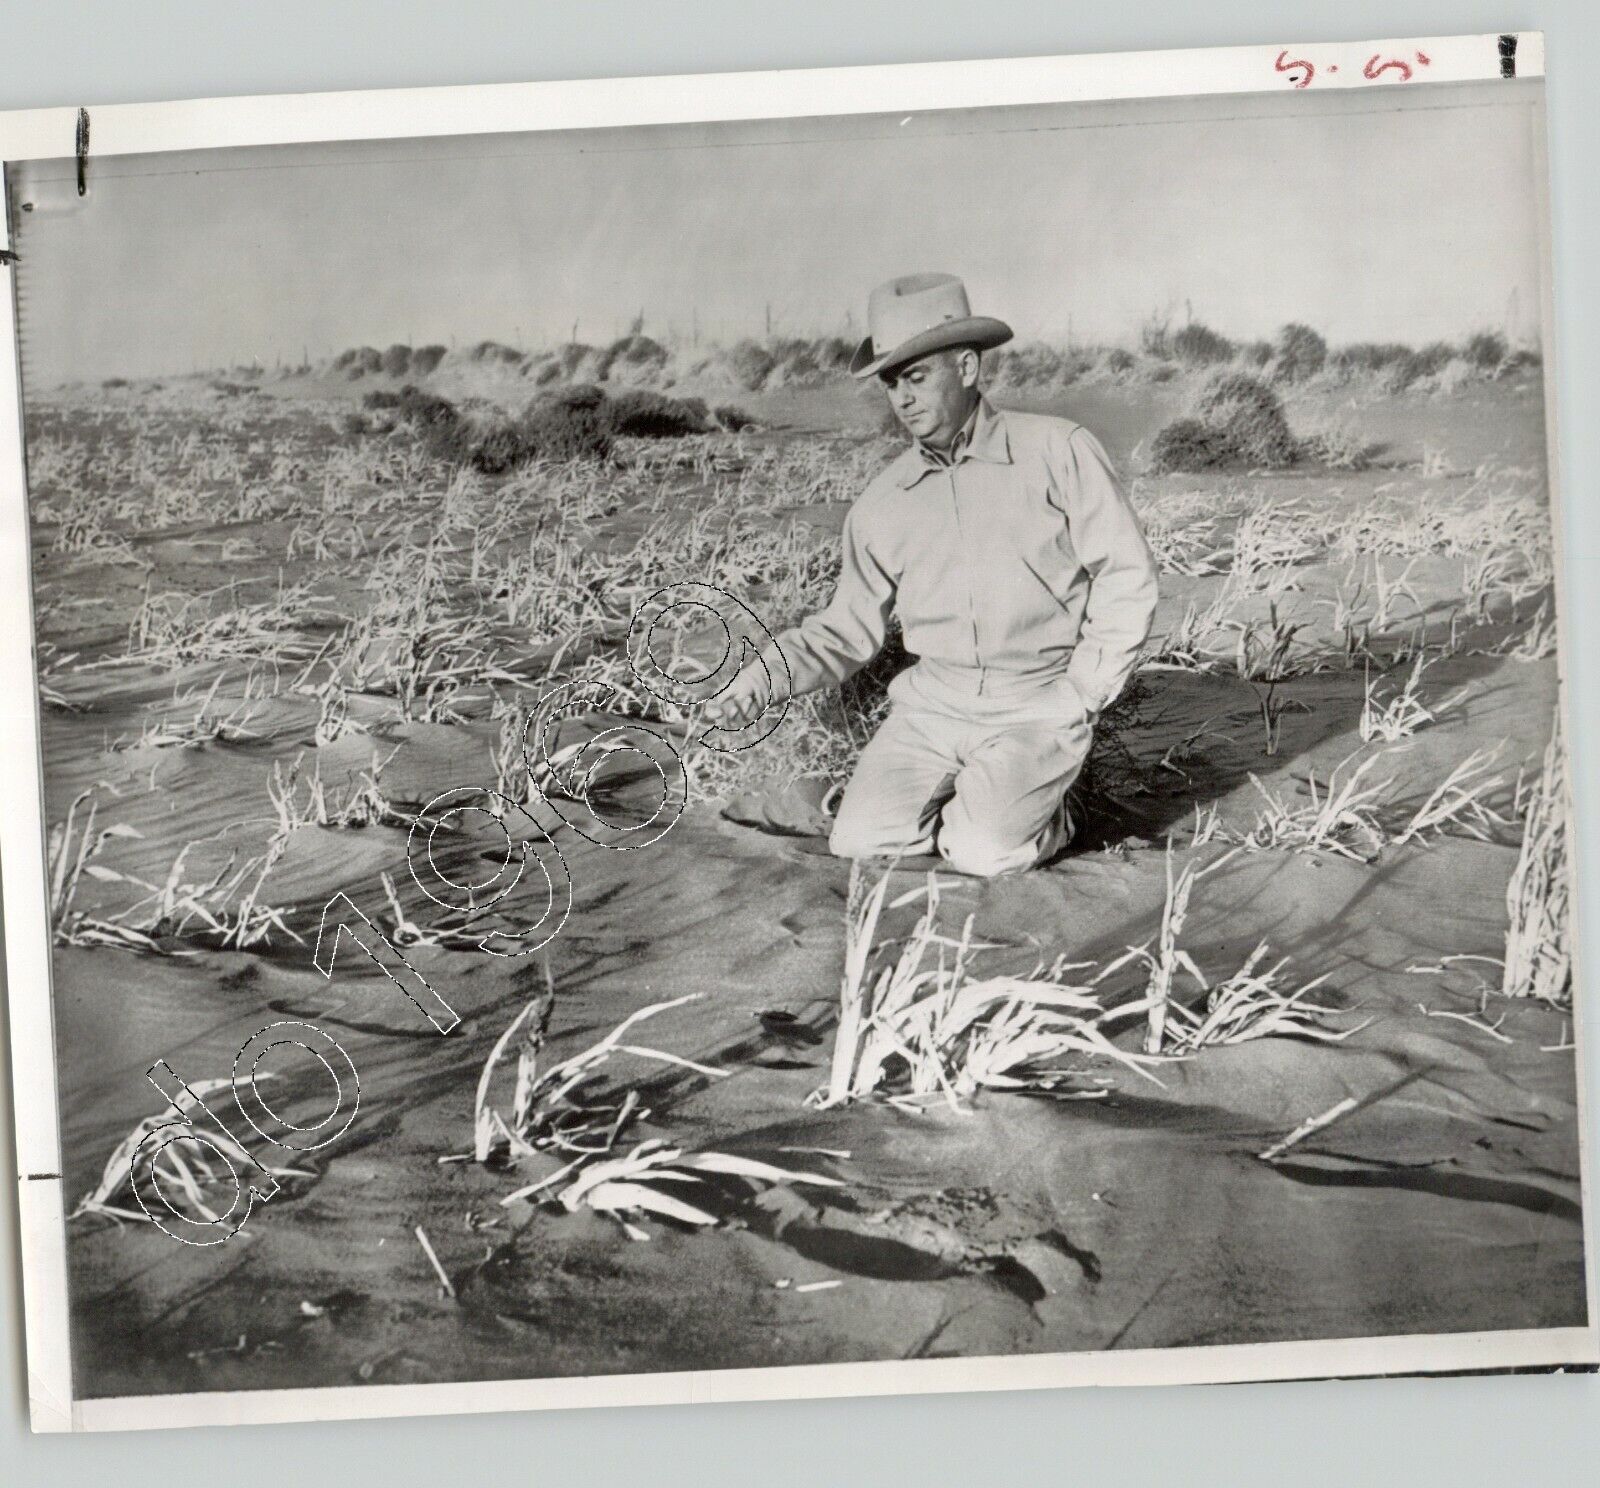 LUBBOCK TEXAS FARMER N McMahan In Field After SANDSTORM Drought 1957 Press Photo